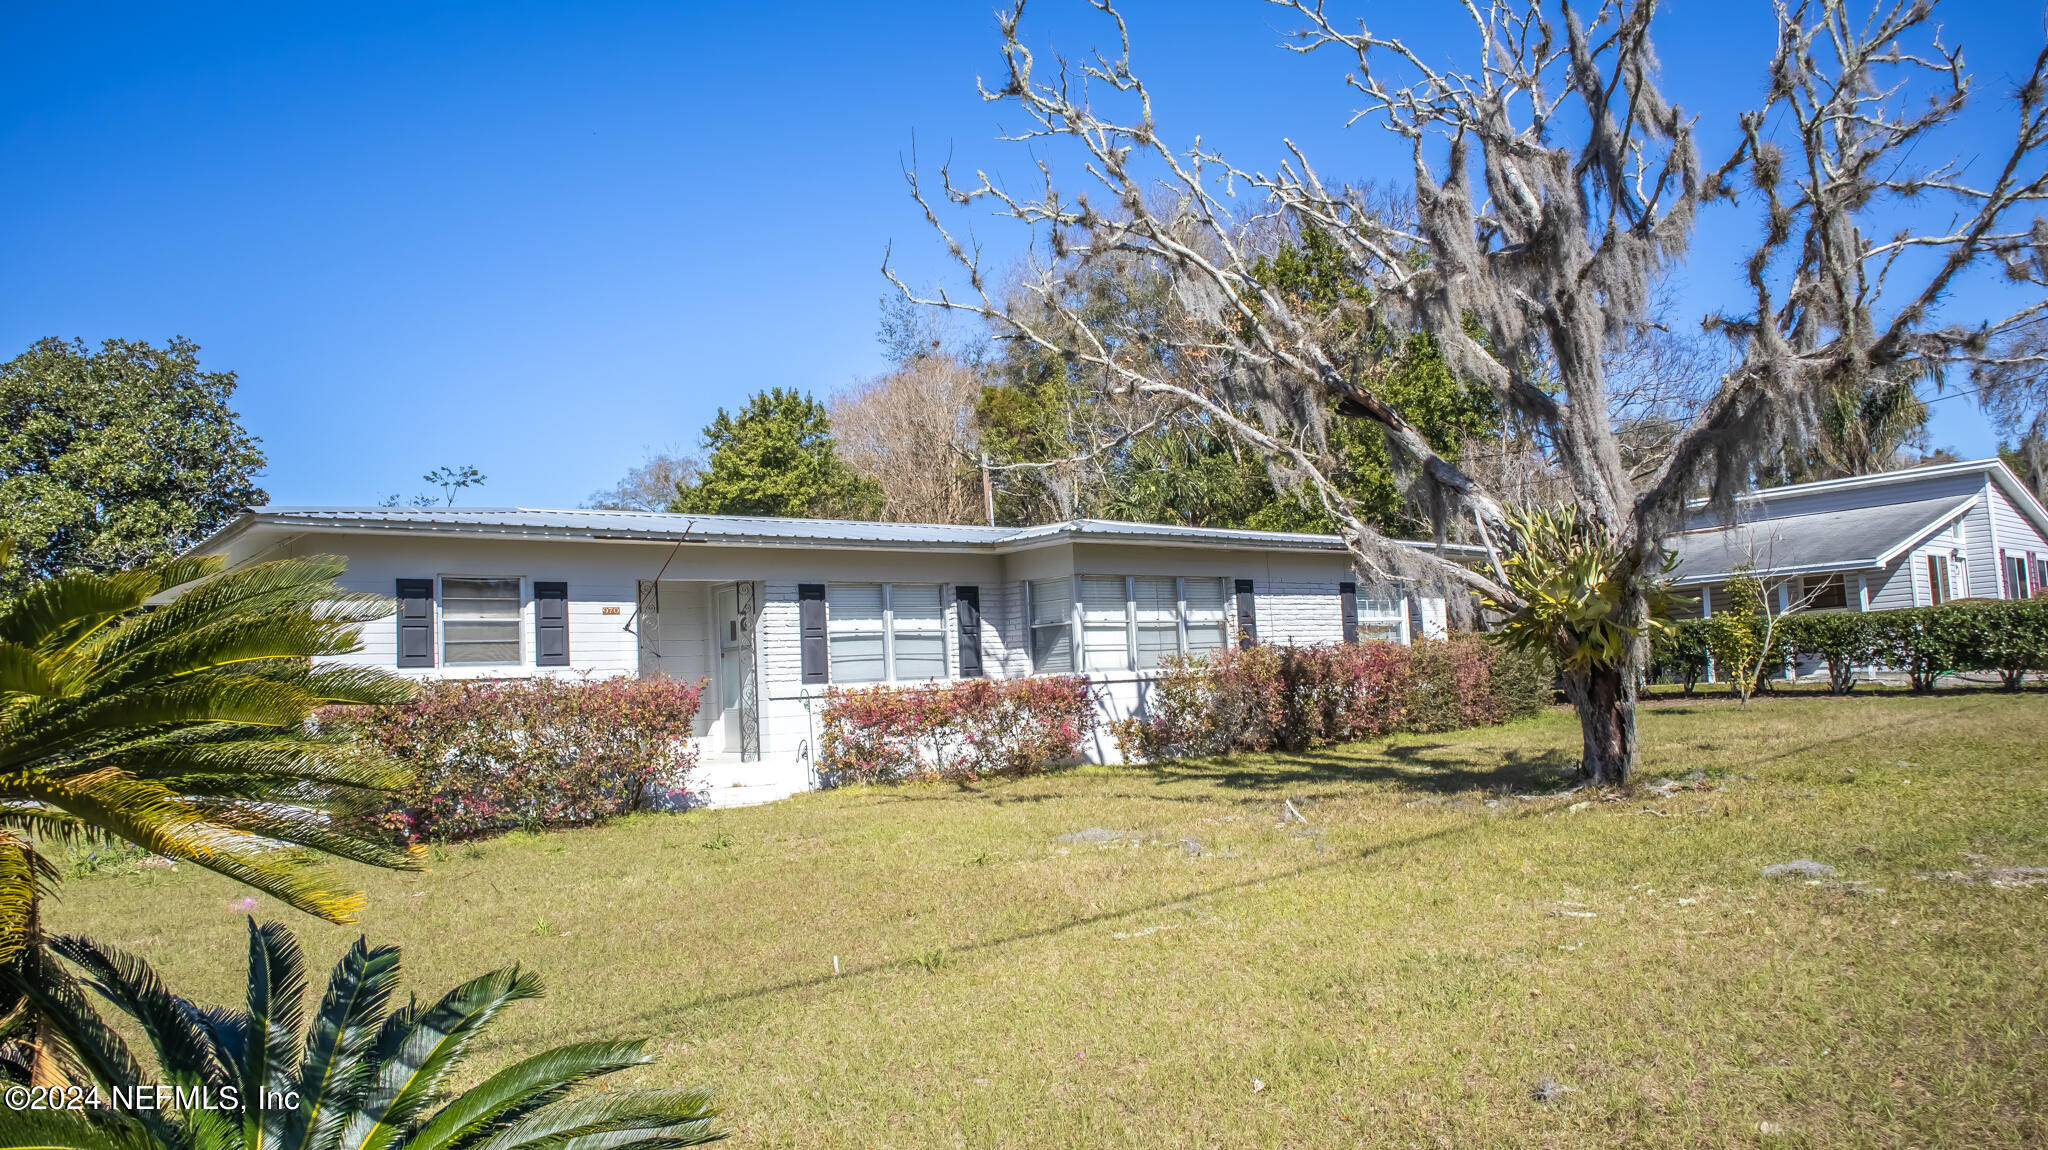 Keystone Heights, FL home for sale located at 970 S LAWRENCE Boulevard, Keystone Heights, FL 32656